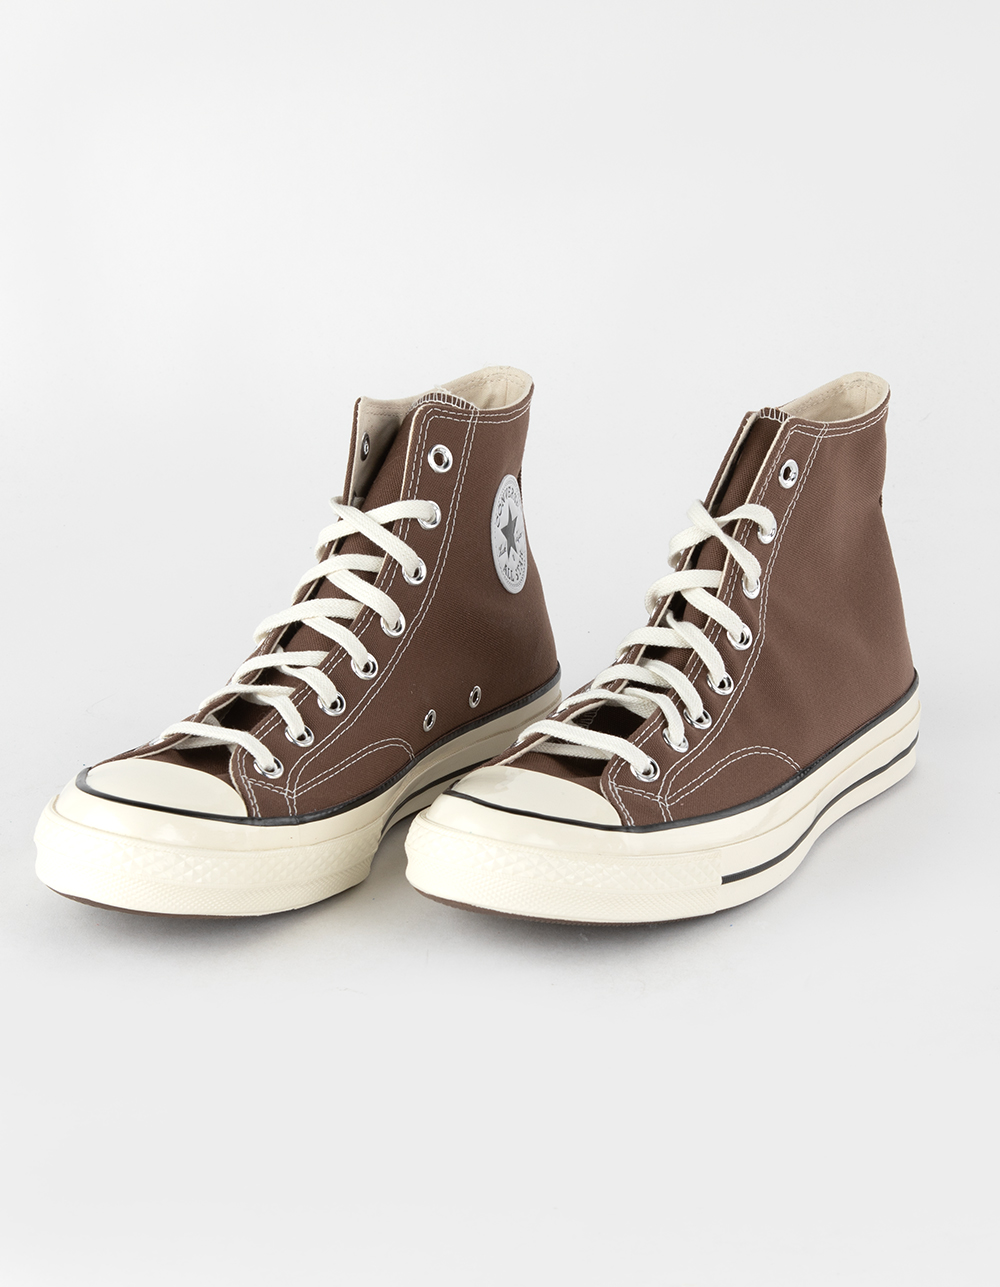 Converse Brown Leather Low-Top Shoes Sneakers Mens 8 Women 10